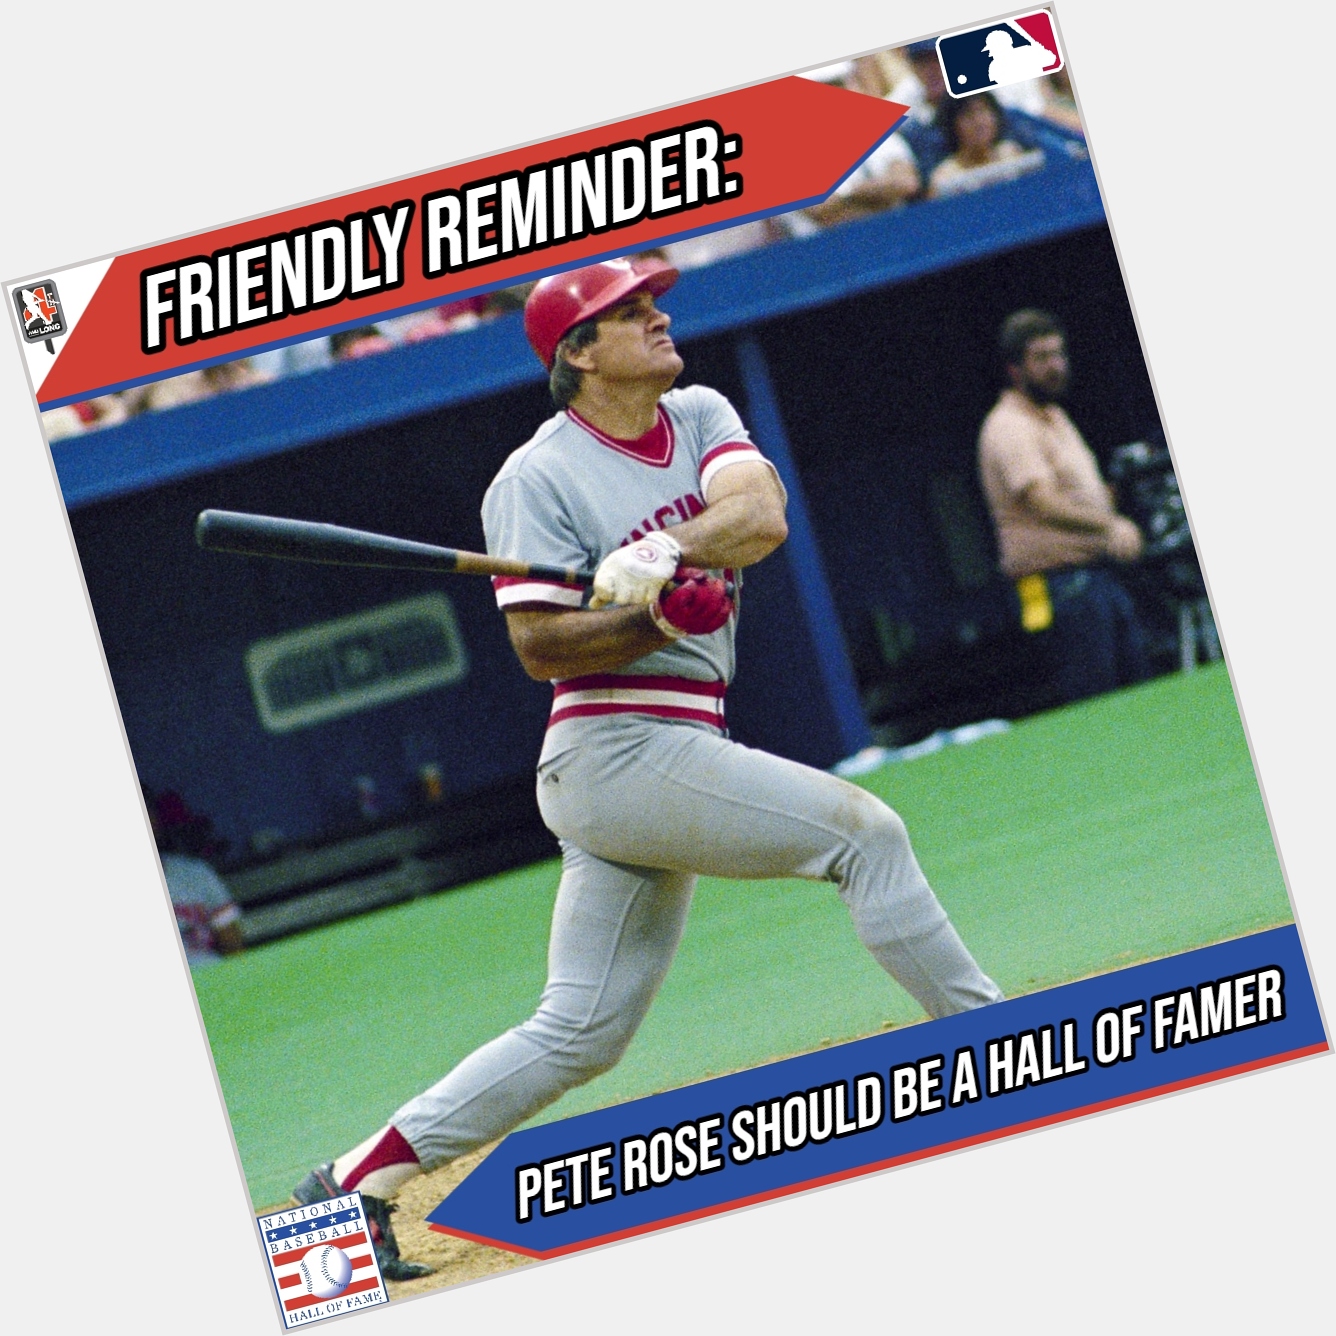 Happy birthday to Pete Rose

It\s a great day to remind everyone that he belongs in the Baseball Hall of Fame 